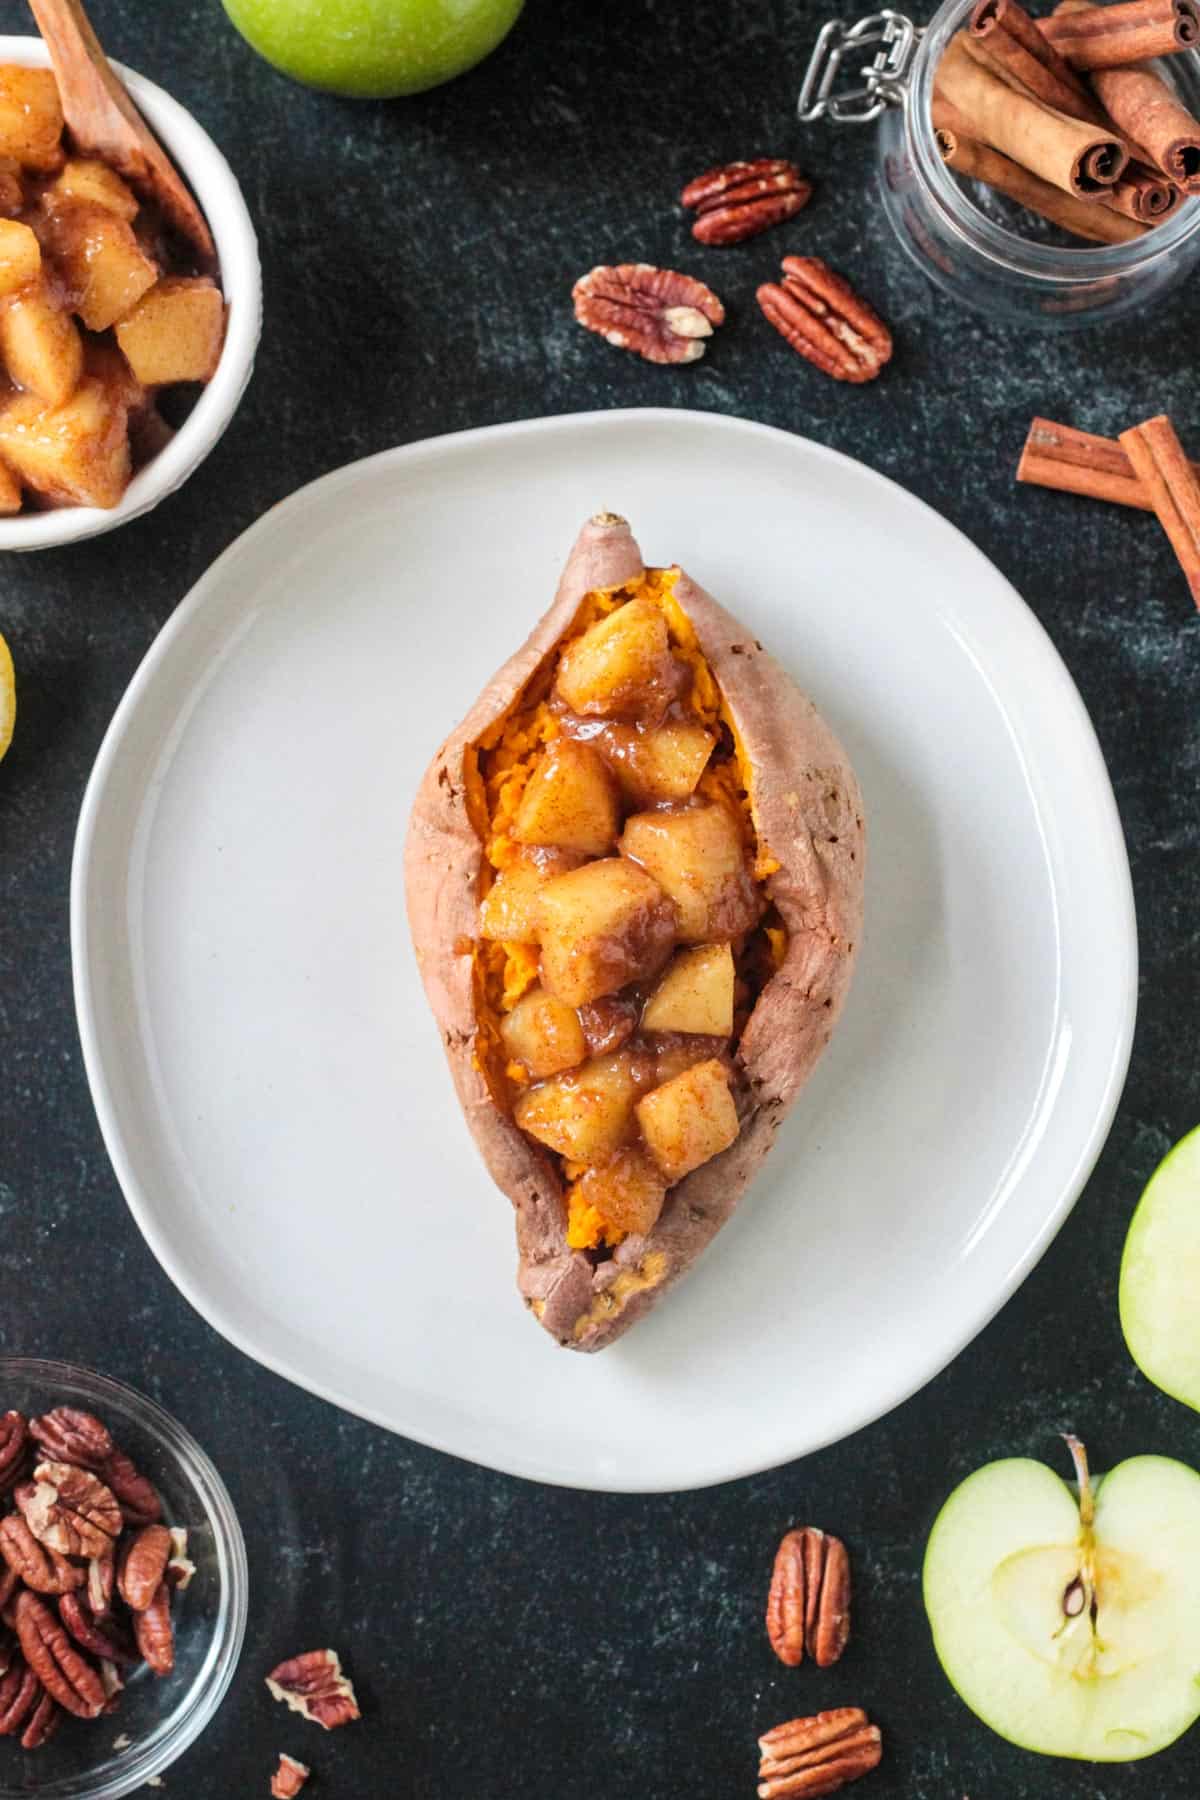 Saucy diced cinnamon apples stuffed in a cooked sweet potato.